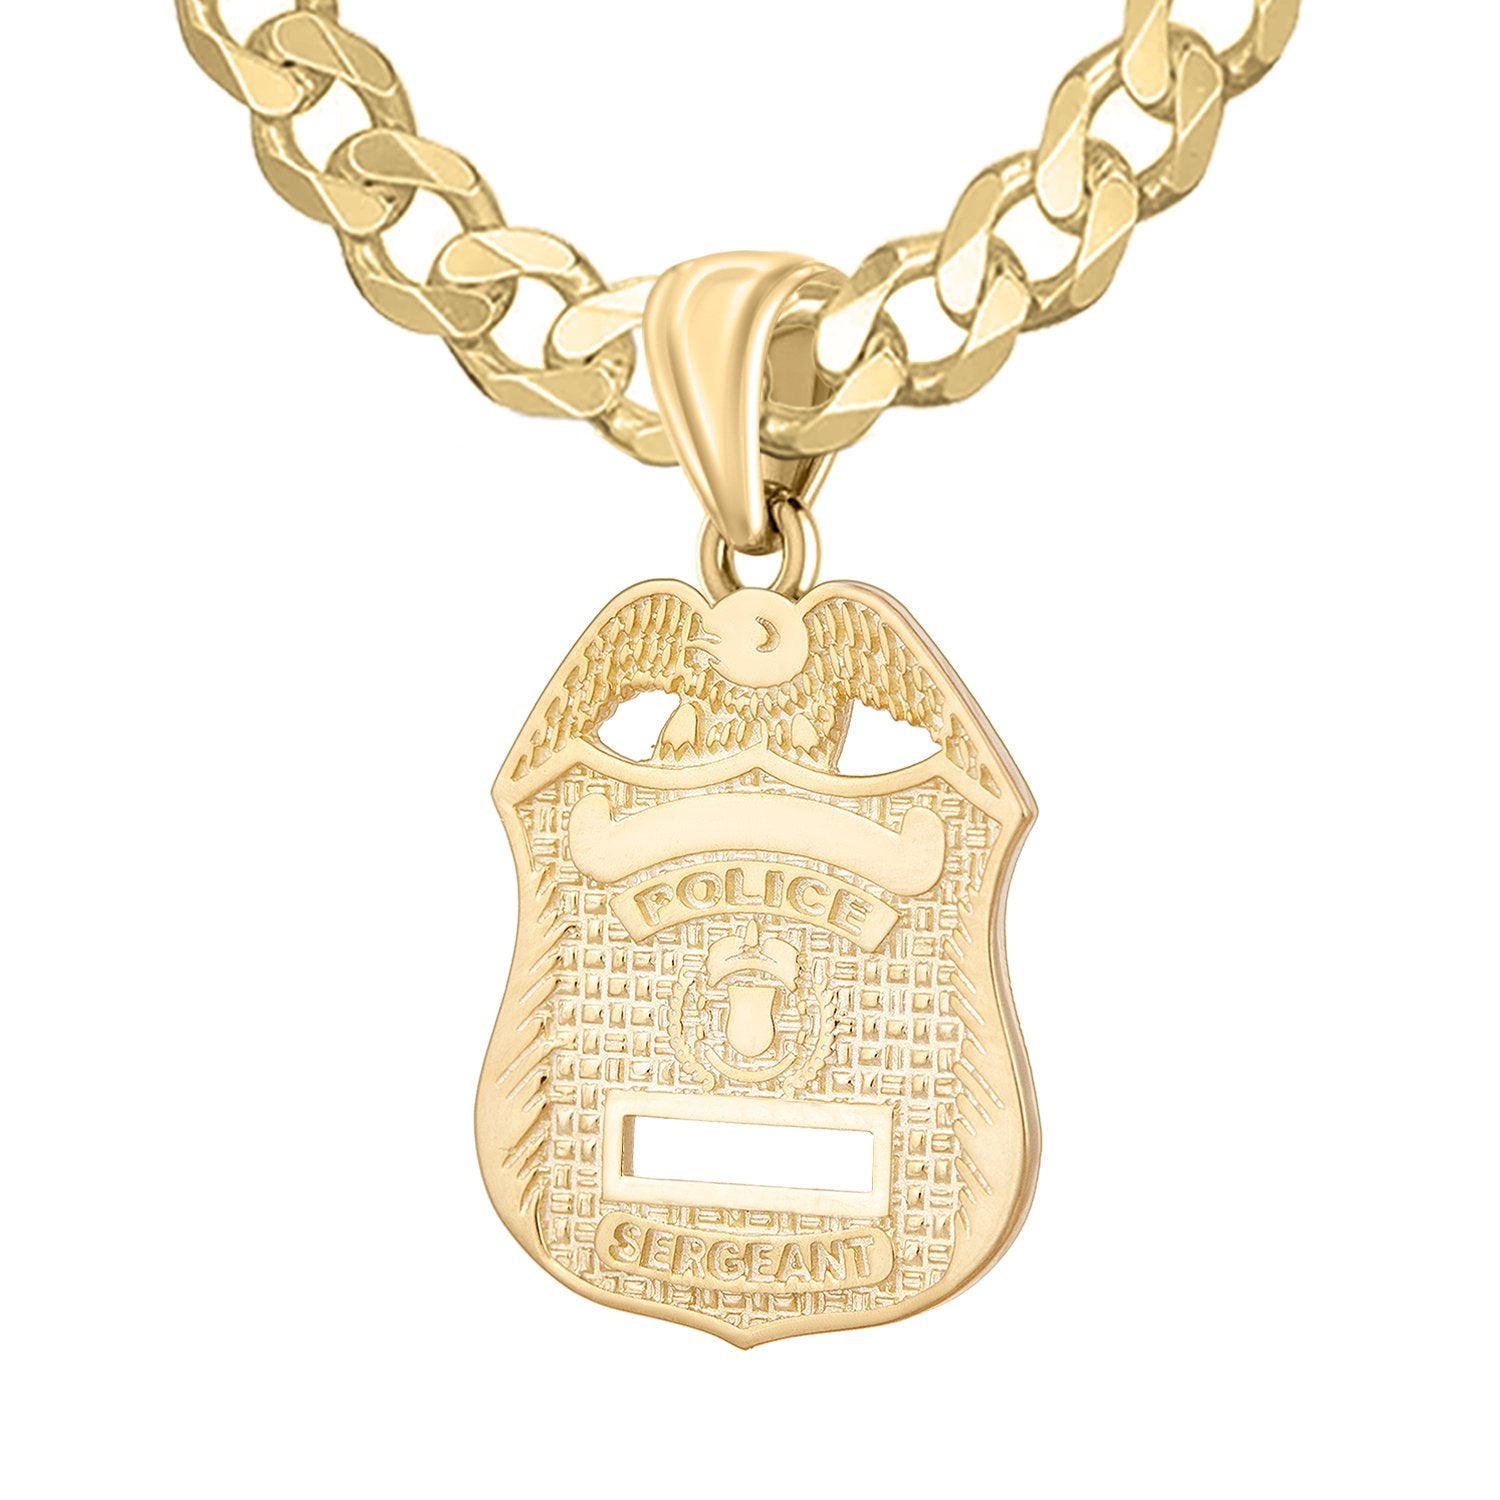 Police Badge Necklace In Gold For Men - 5.7mm Curb Chain